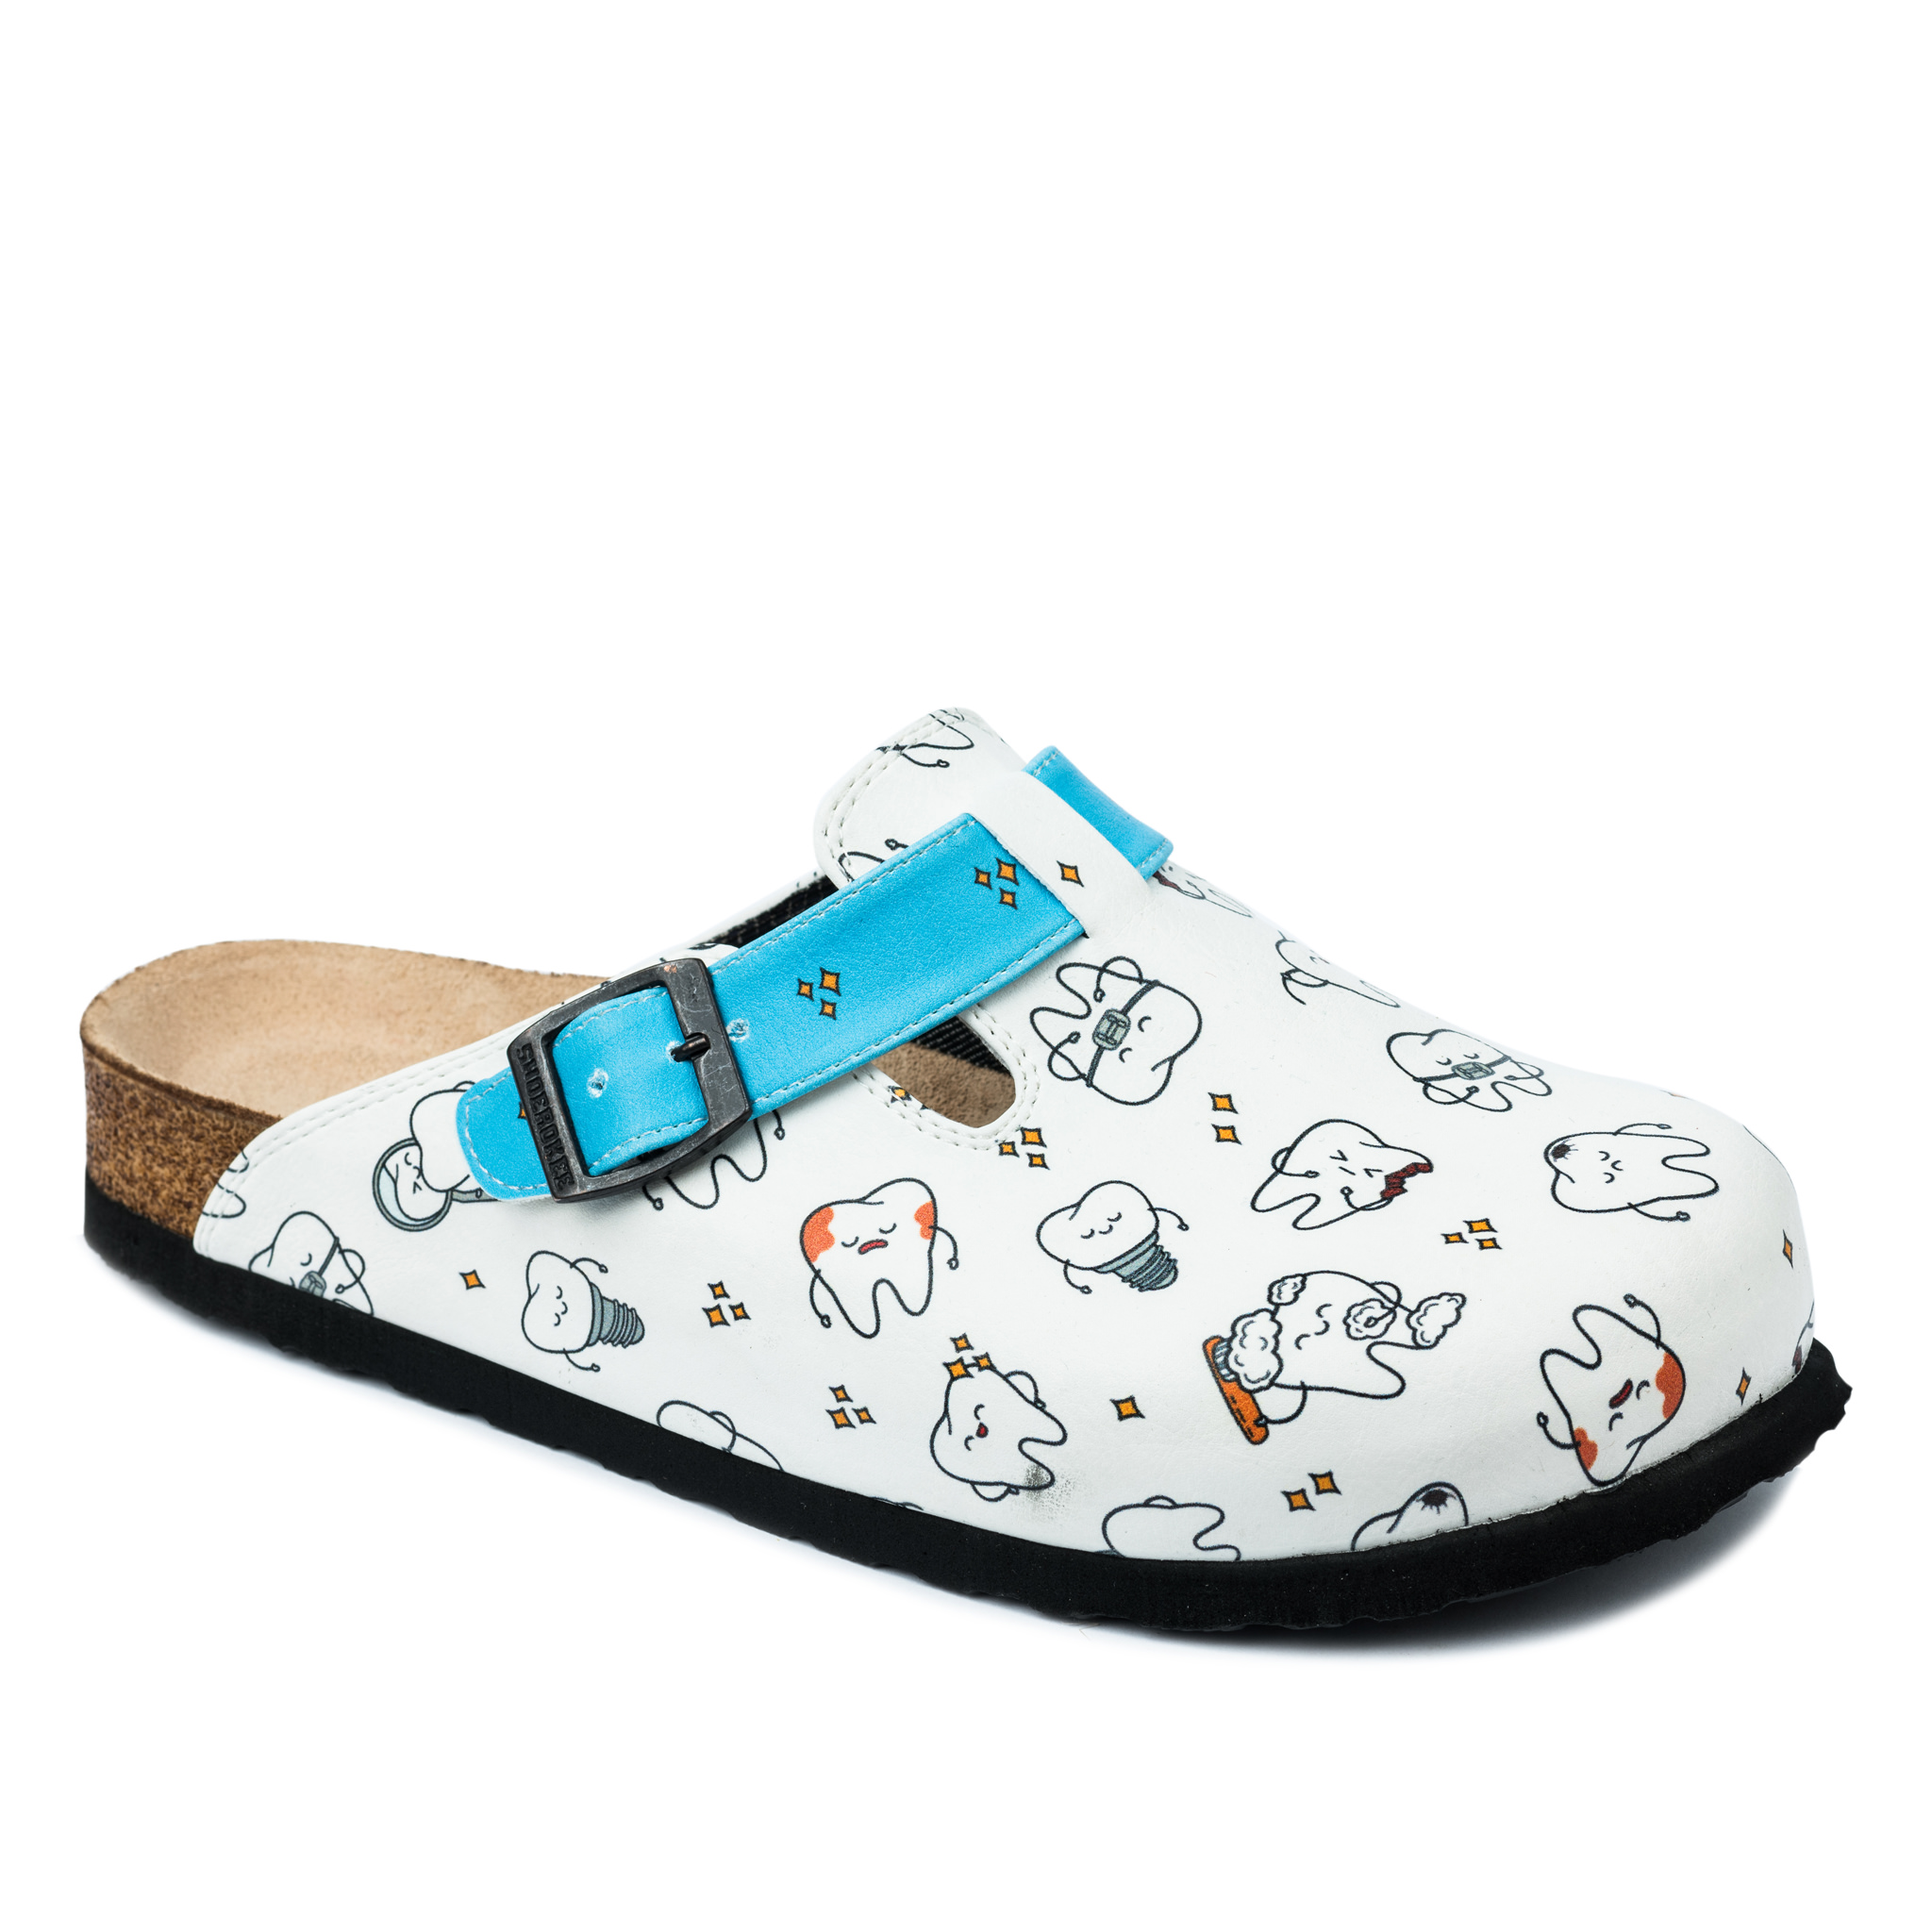 Patterned women clogs A022 - DENTIST - WHITE